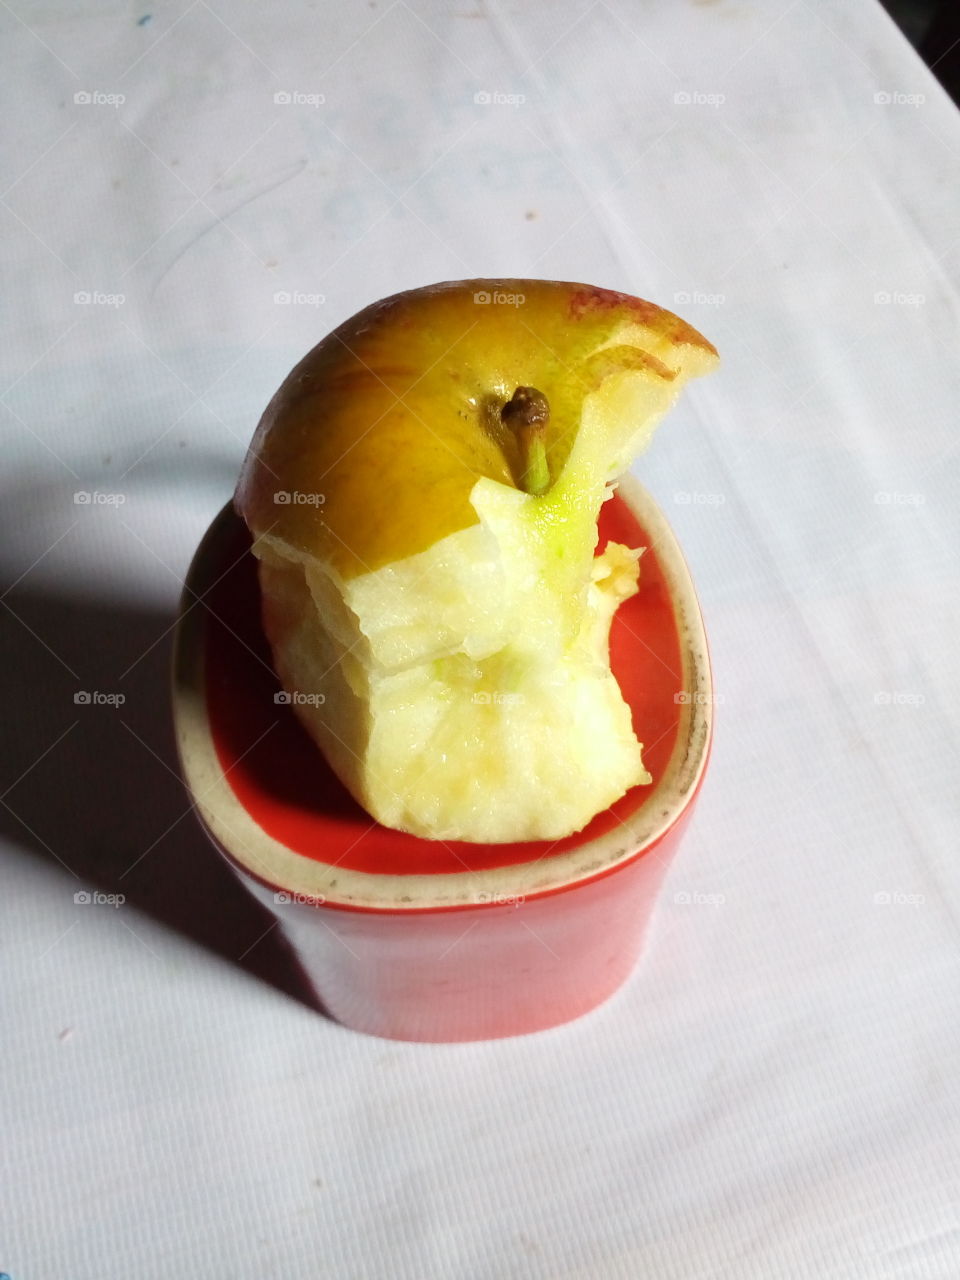 A
Apple eating